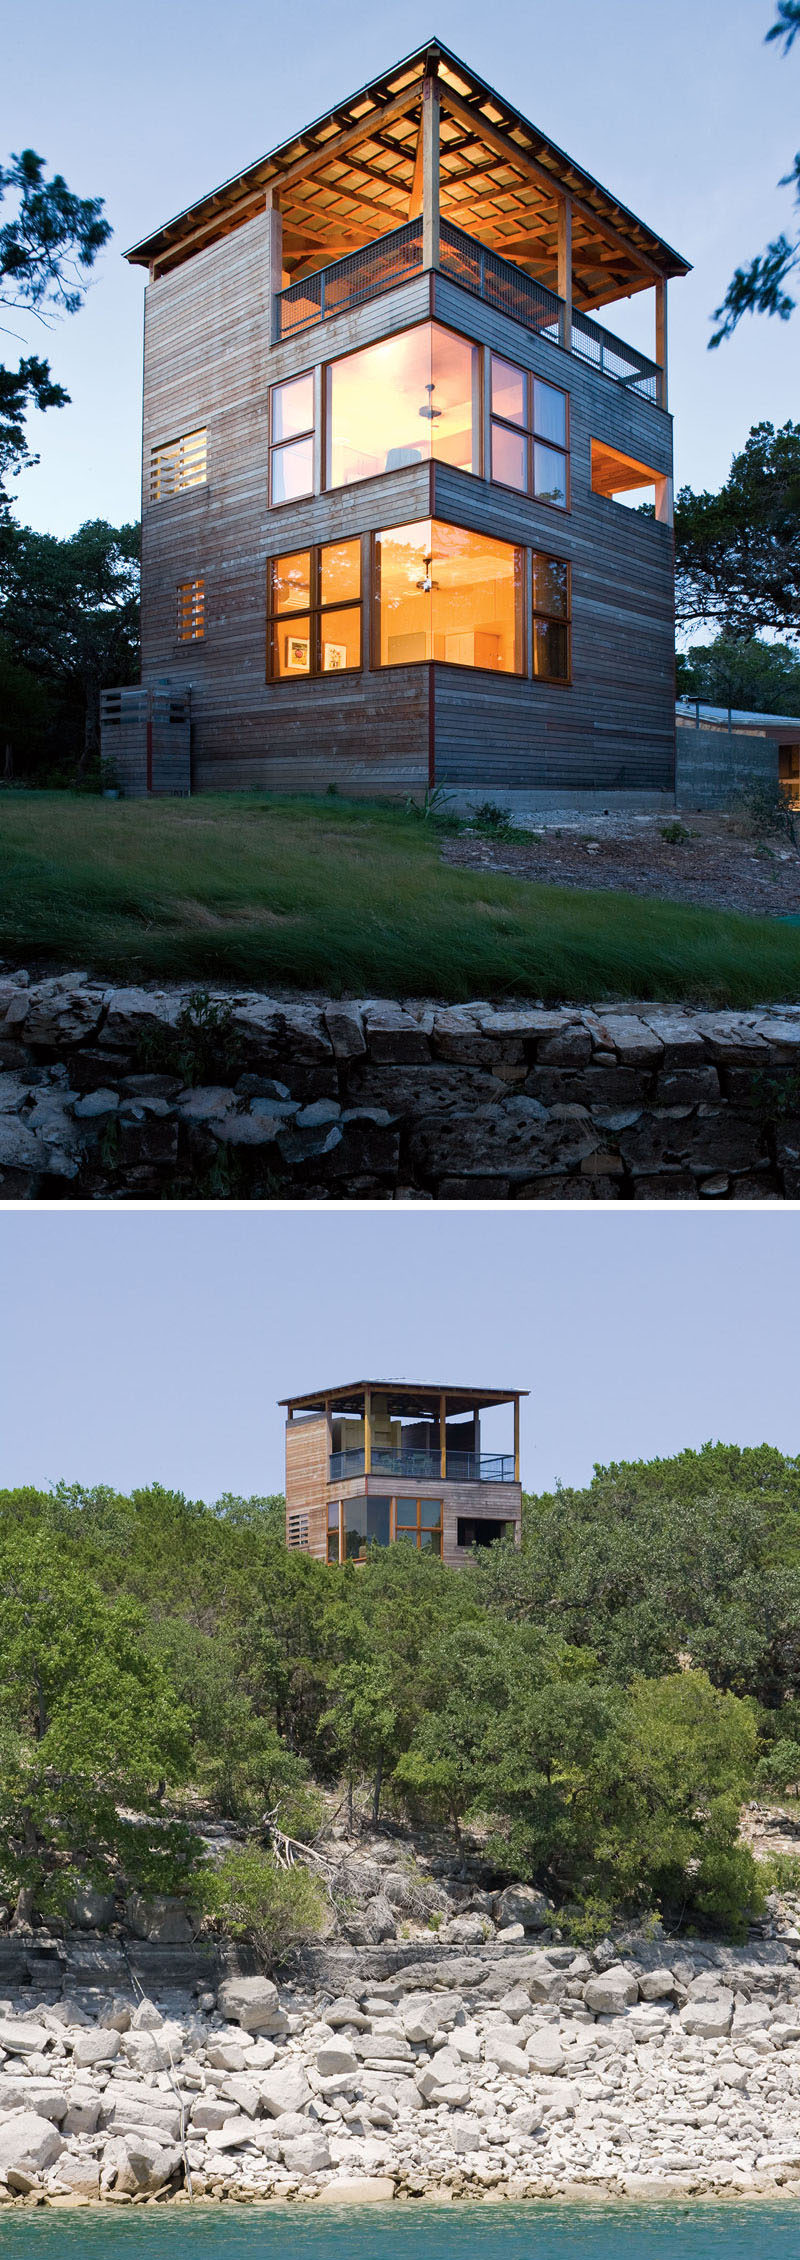 This three-storey modern tower rises up out of the forest and provides views of Lake Travis, which is barely visible at ground level through the surrounding trees. #ModernArchitecture